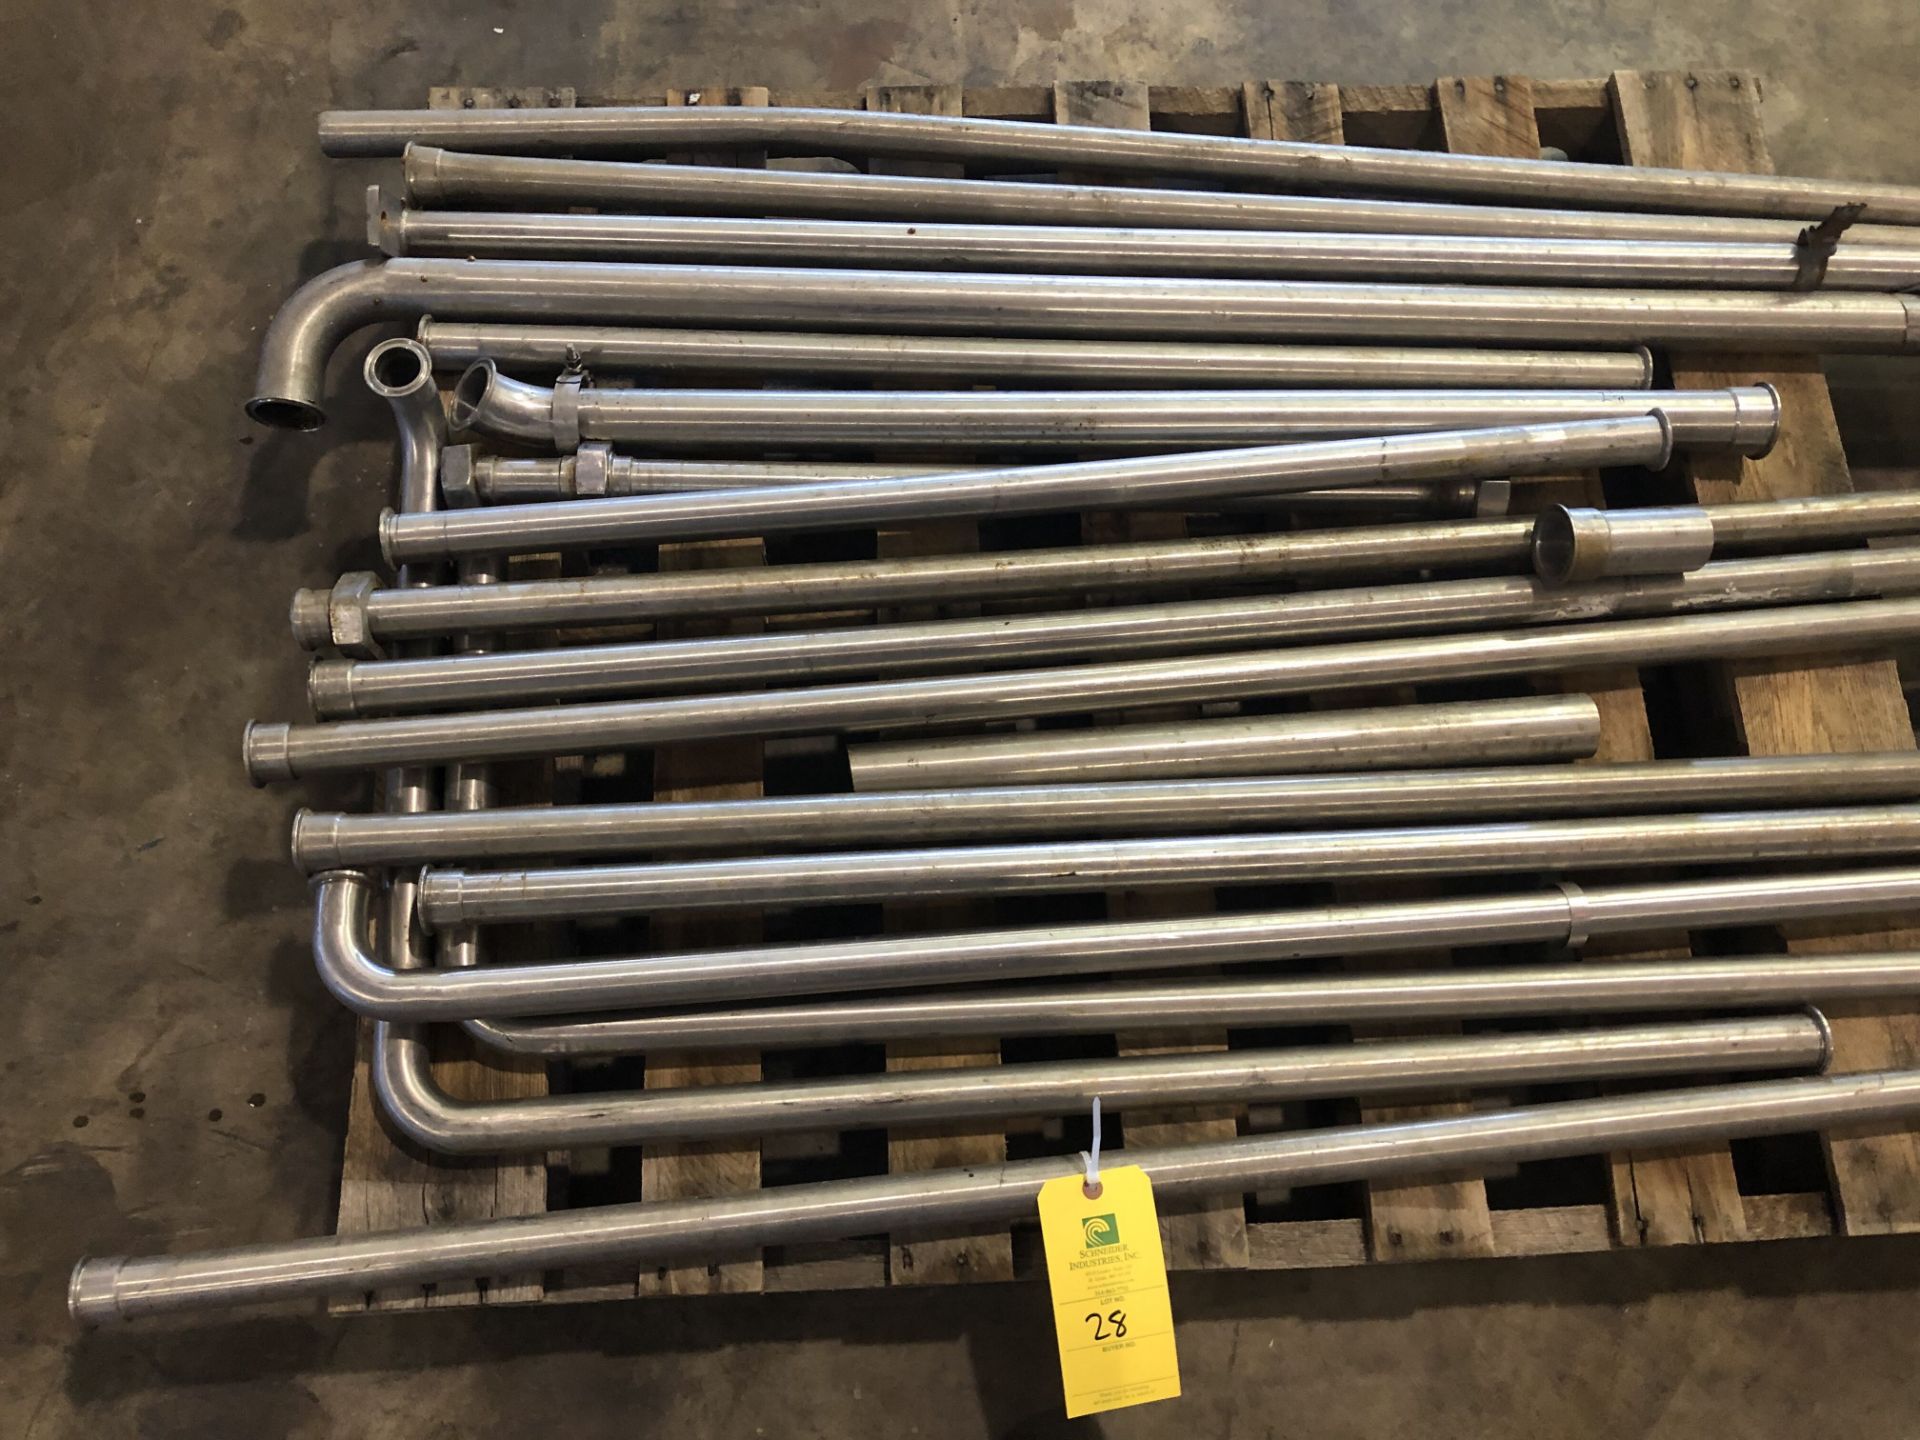 Pallet of Food Grade Stainless Steel Piping, Rigging Price: $40 - Image 2 of 3